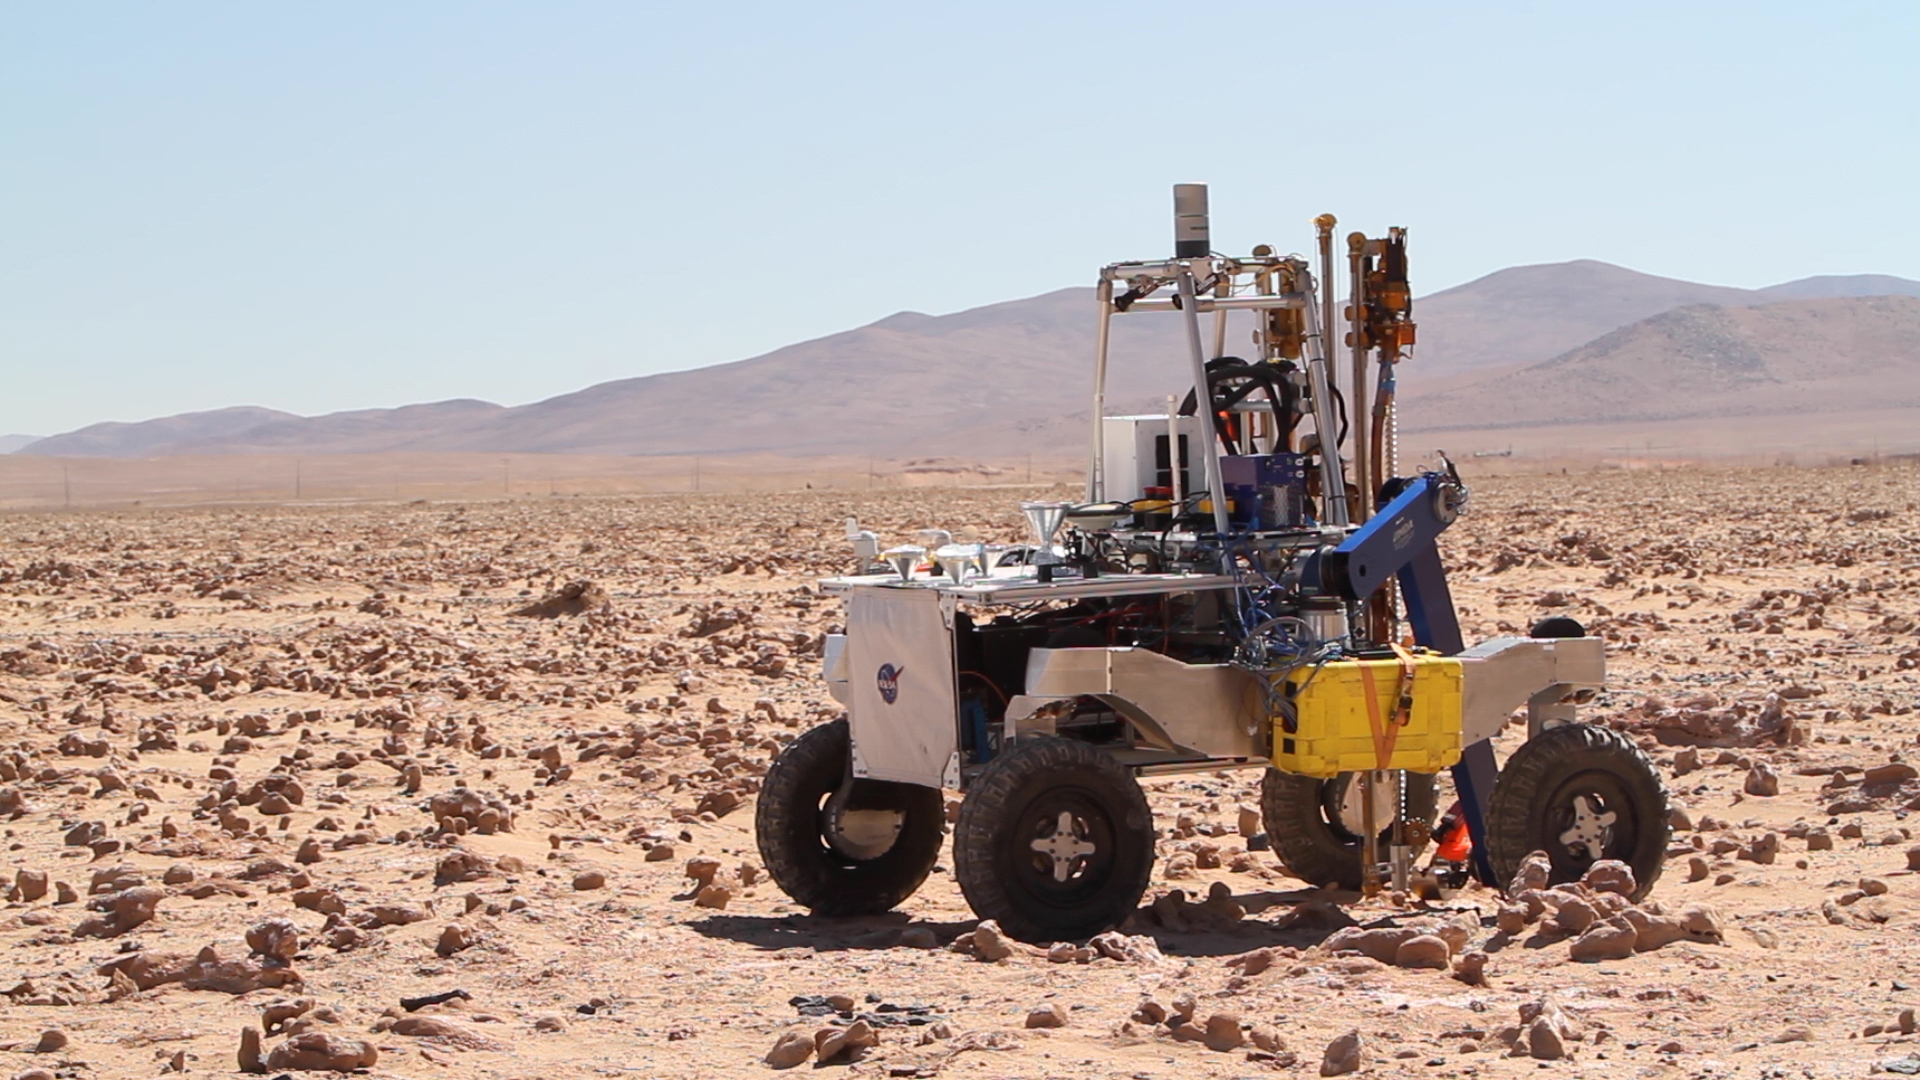 A four-wheeled rover in a dramatic desert landscape with instrumentation and a drill mounted on top of it.